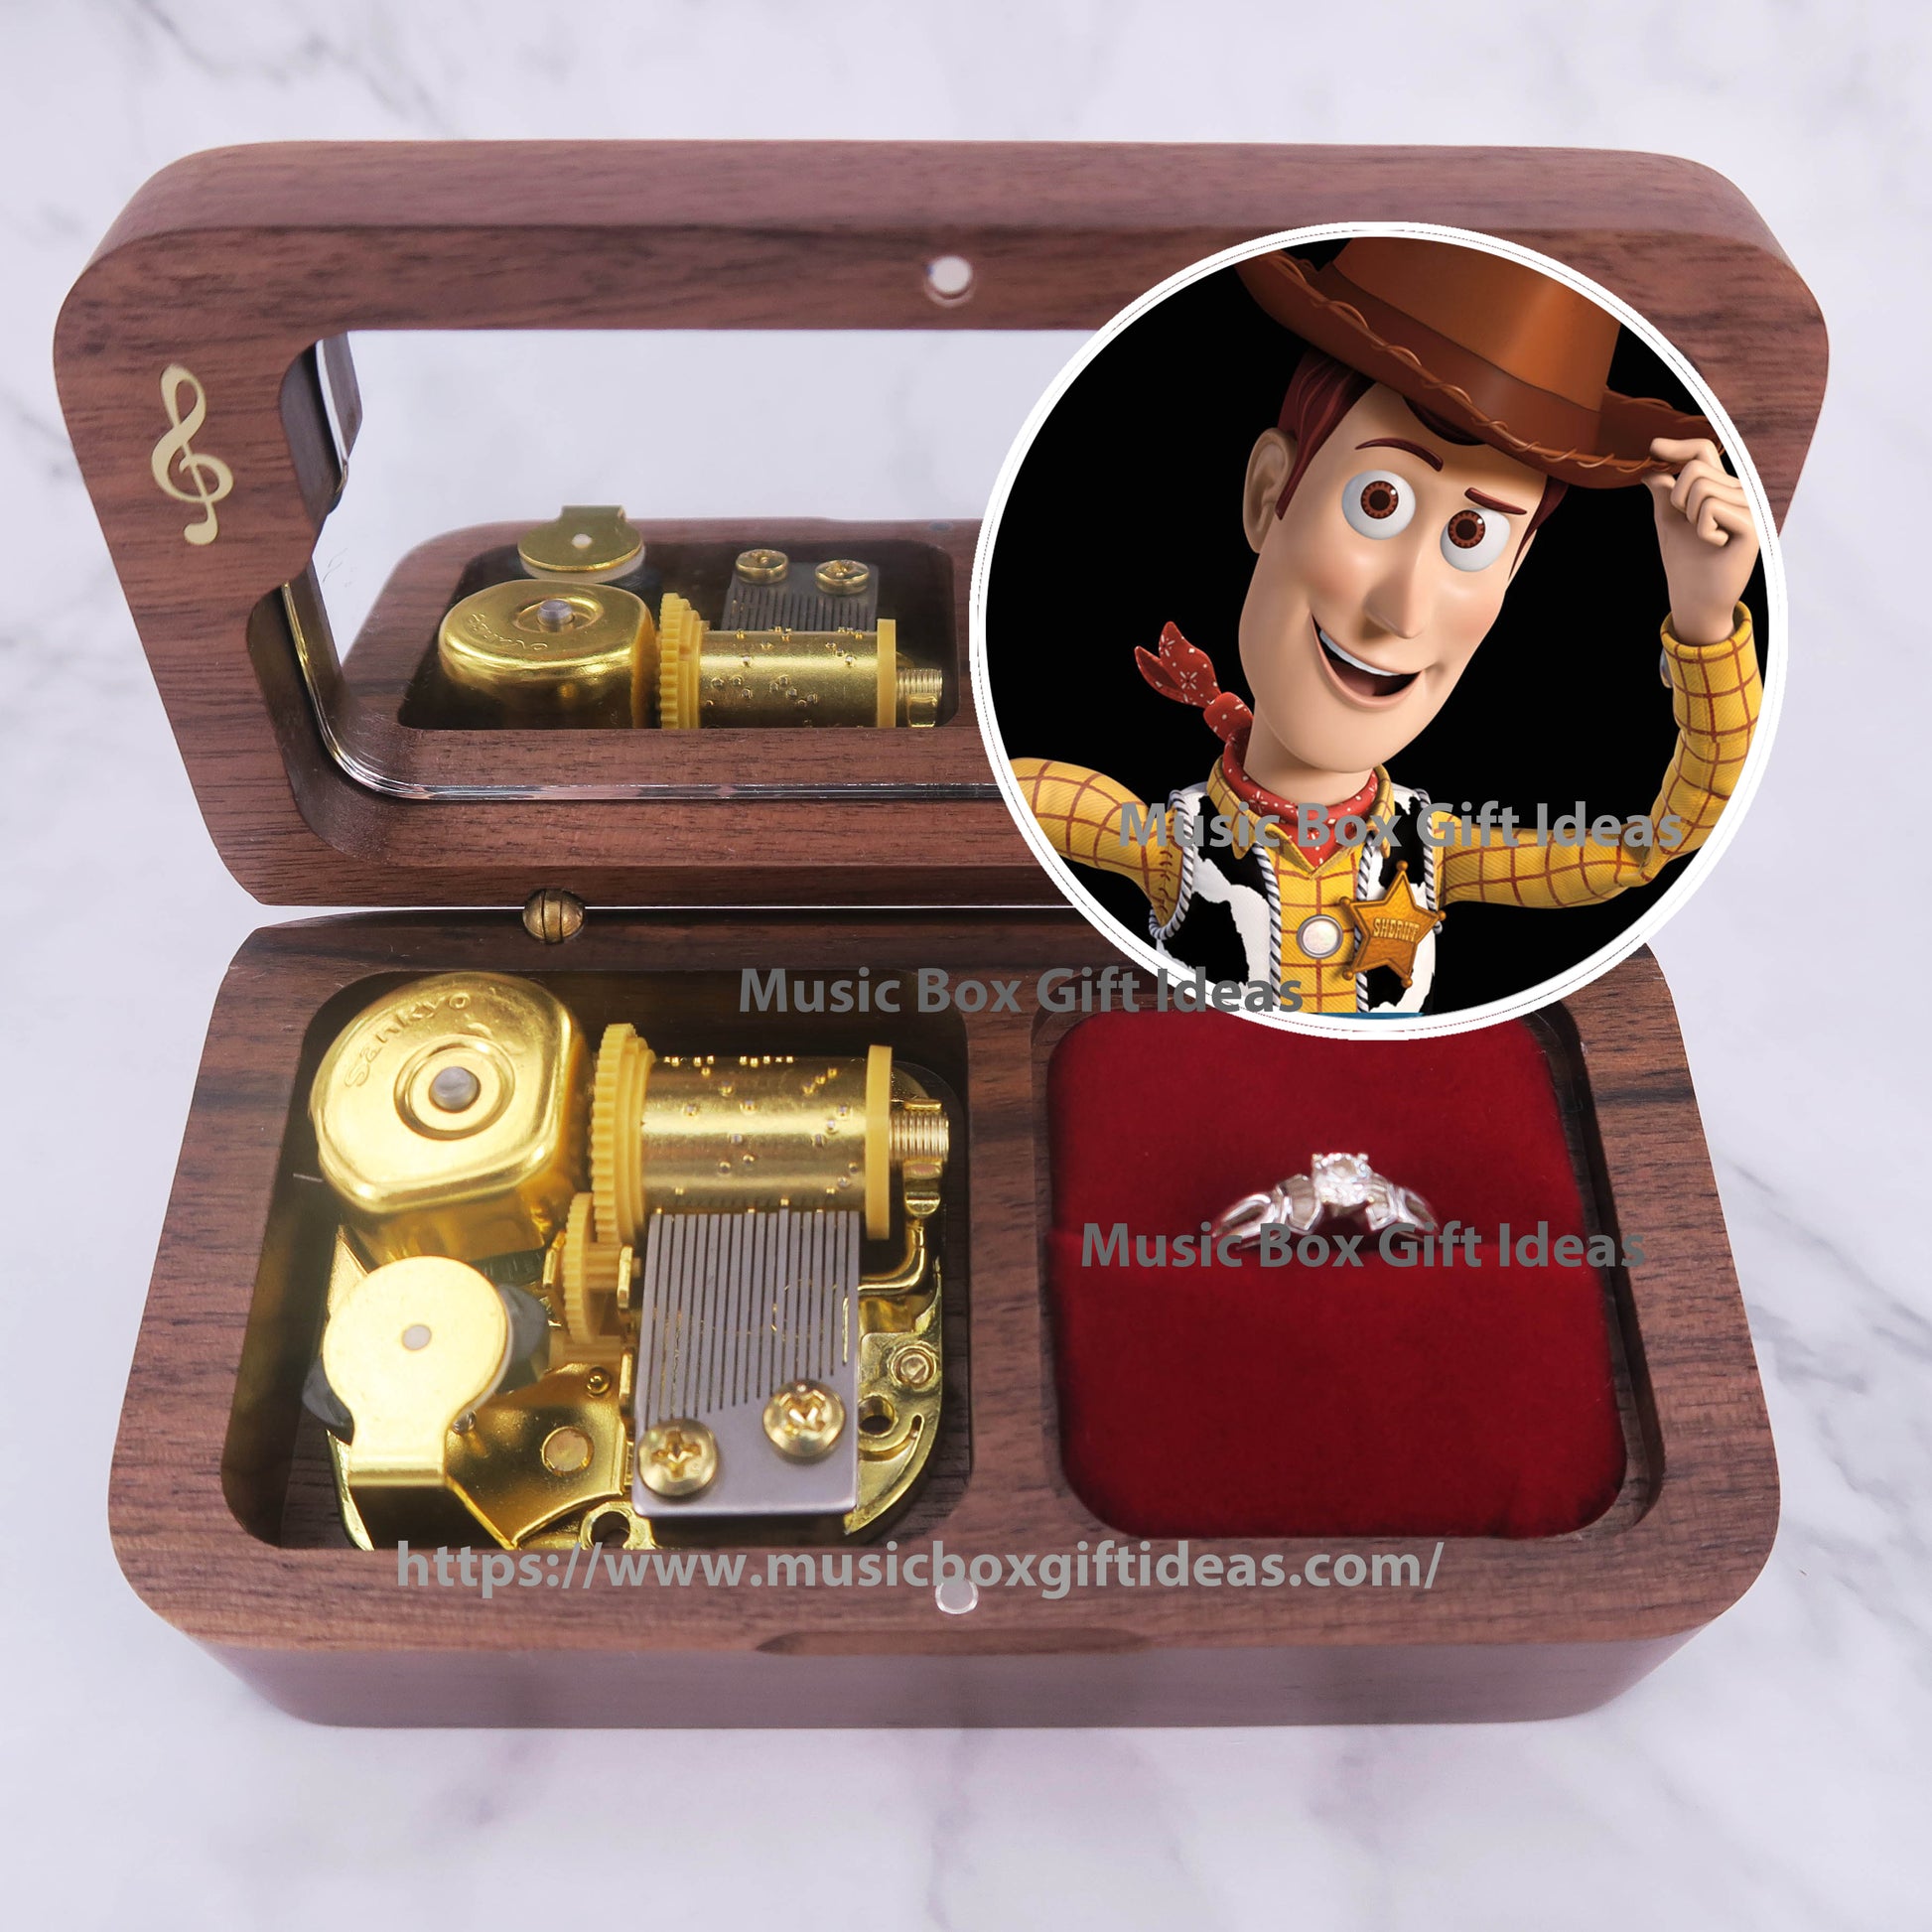 Disney Toy Story Soundtrack You've Got a Friend 18-Note Jewelry Music Box Gift (Wooden Clockwork) - Music Box Gift Ideas